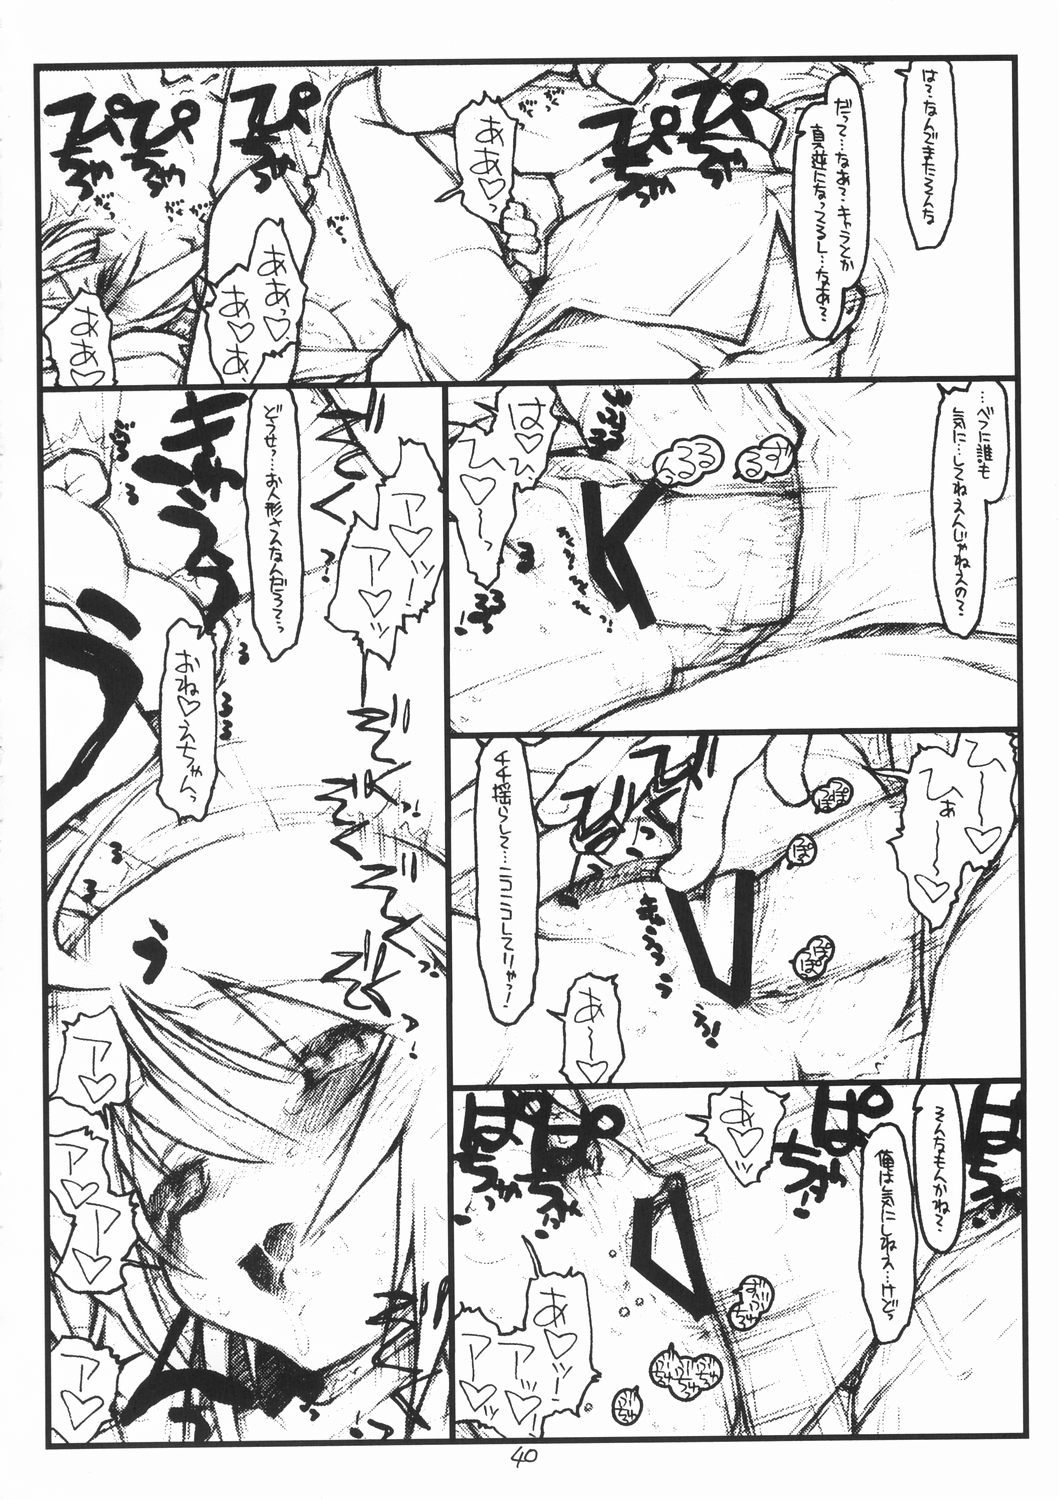 (SC28) [bolze. (rit.)] Miscoordination. (Mobile Suit Gundam SEED DESTINY) page 39 full